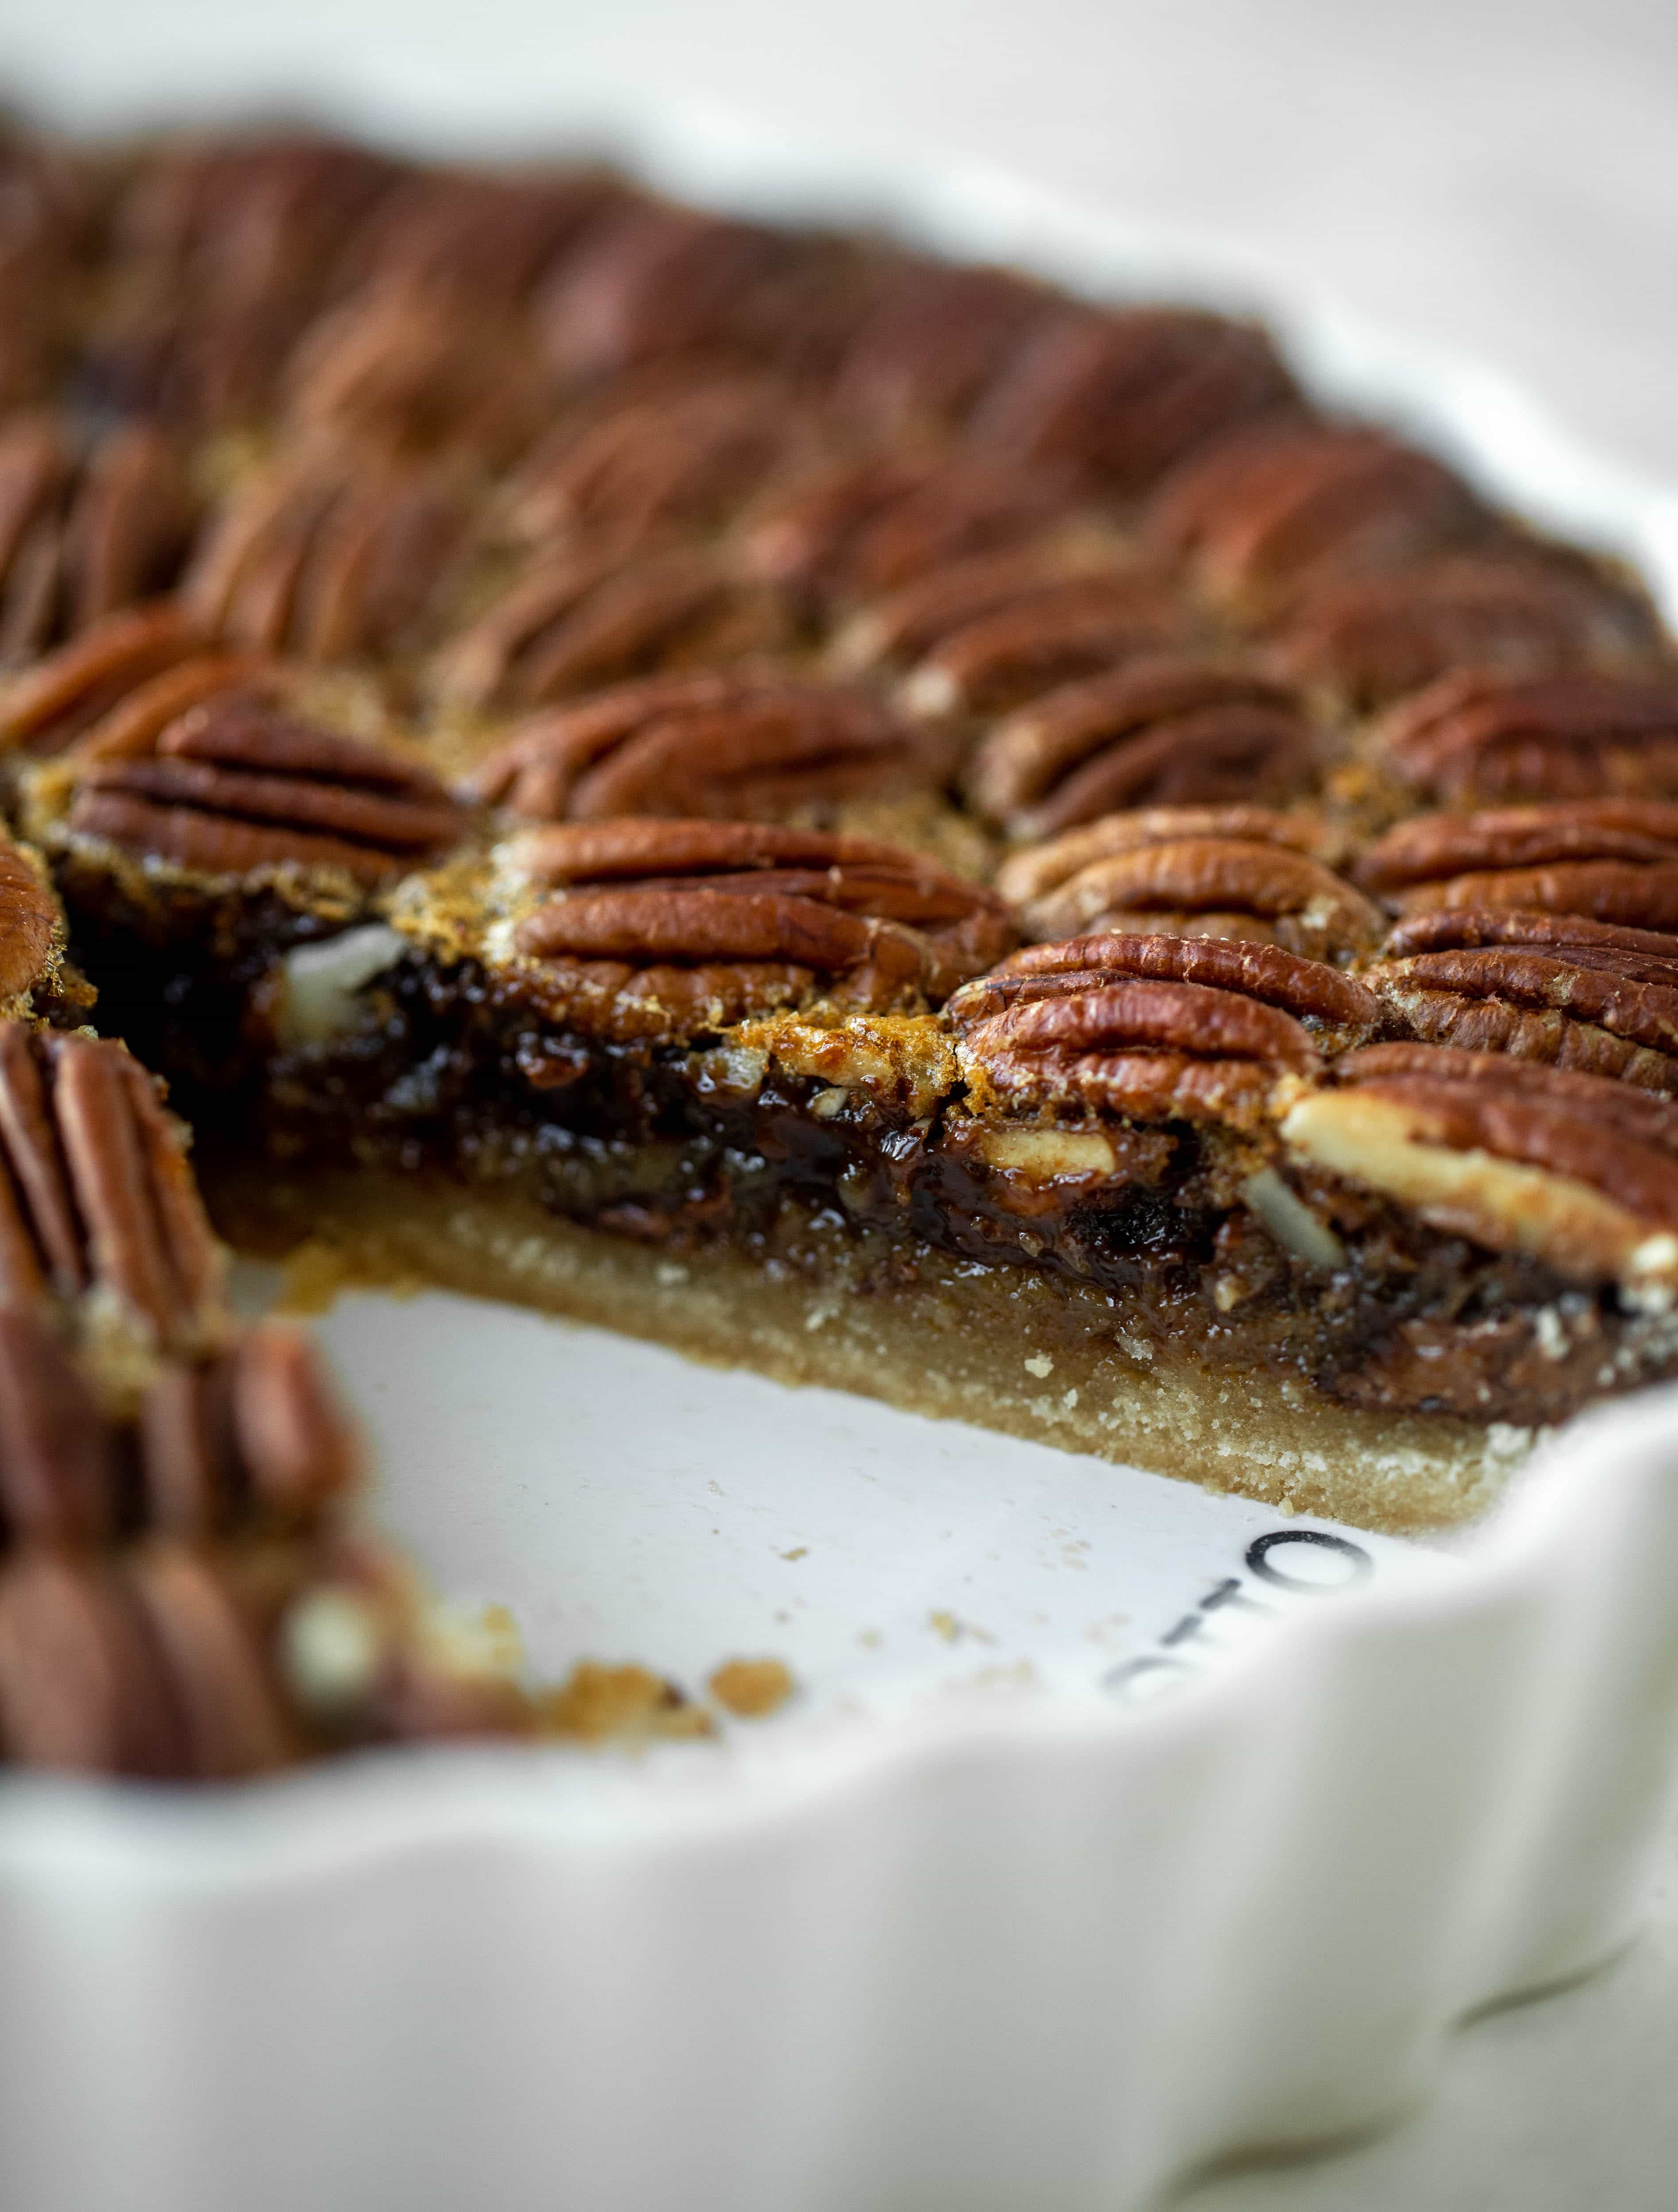 This chocolate pecan tart is the best dessert ever. Chocolate fudge and gooey pecan pie in a shortbread crust - everyone goes crazy! 